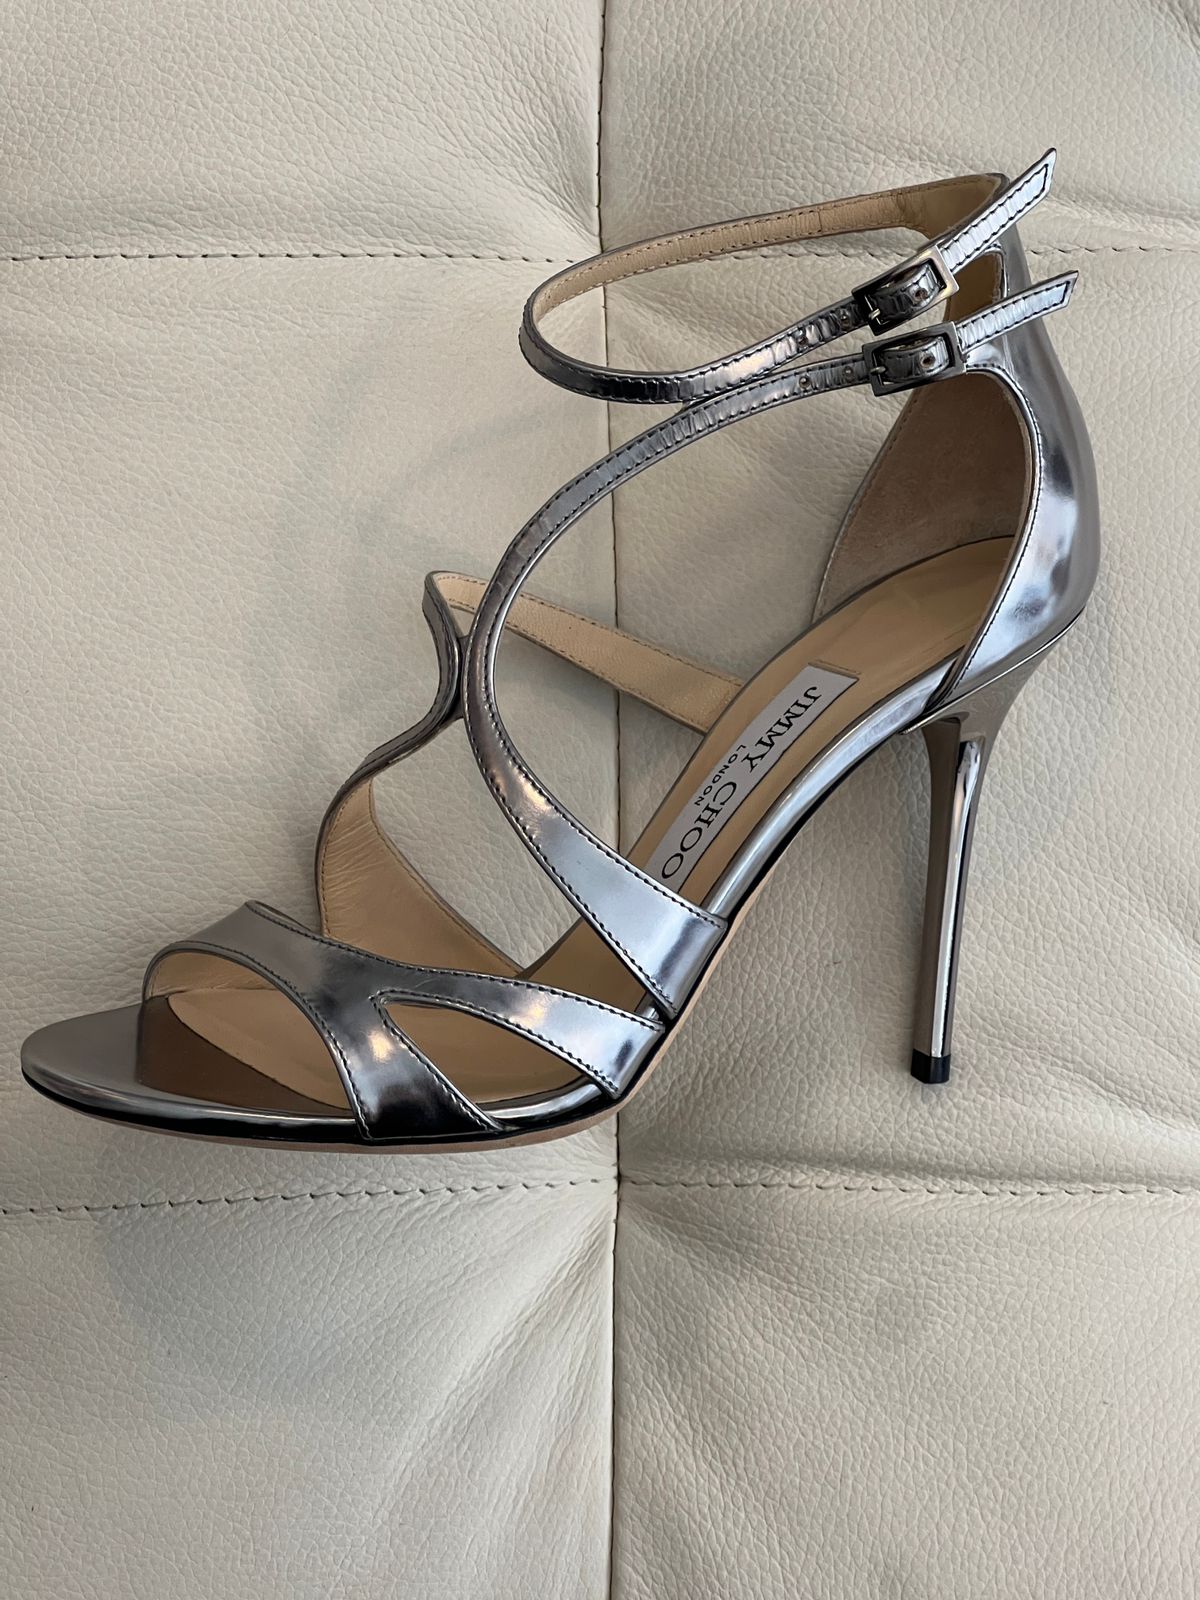 Jimmy Choo Jaxon 95 Patent Leather Heeled Sandals in White | Lyst